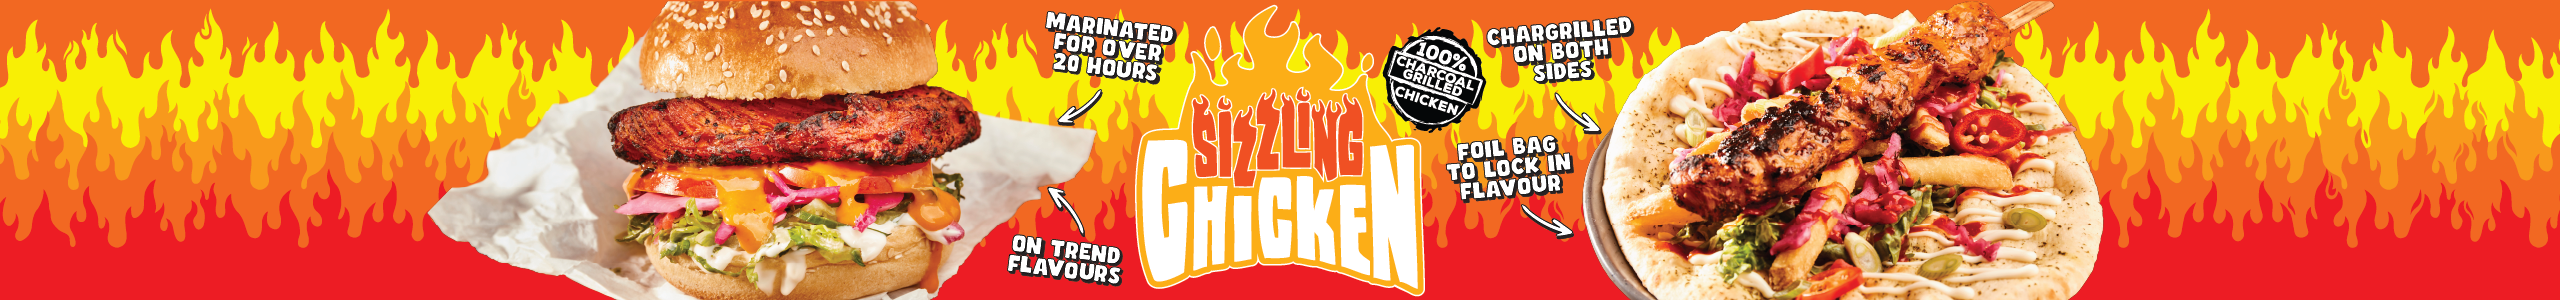 Sizzling-Chicken-Brands-Banner.png